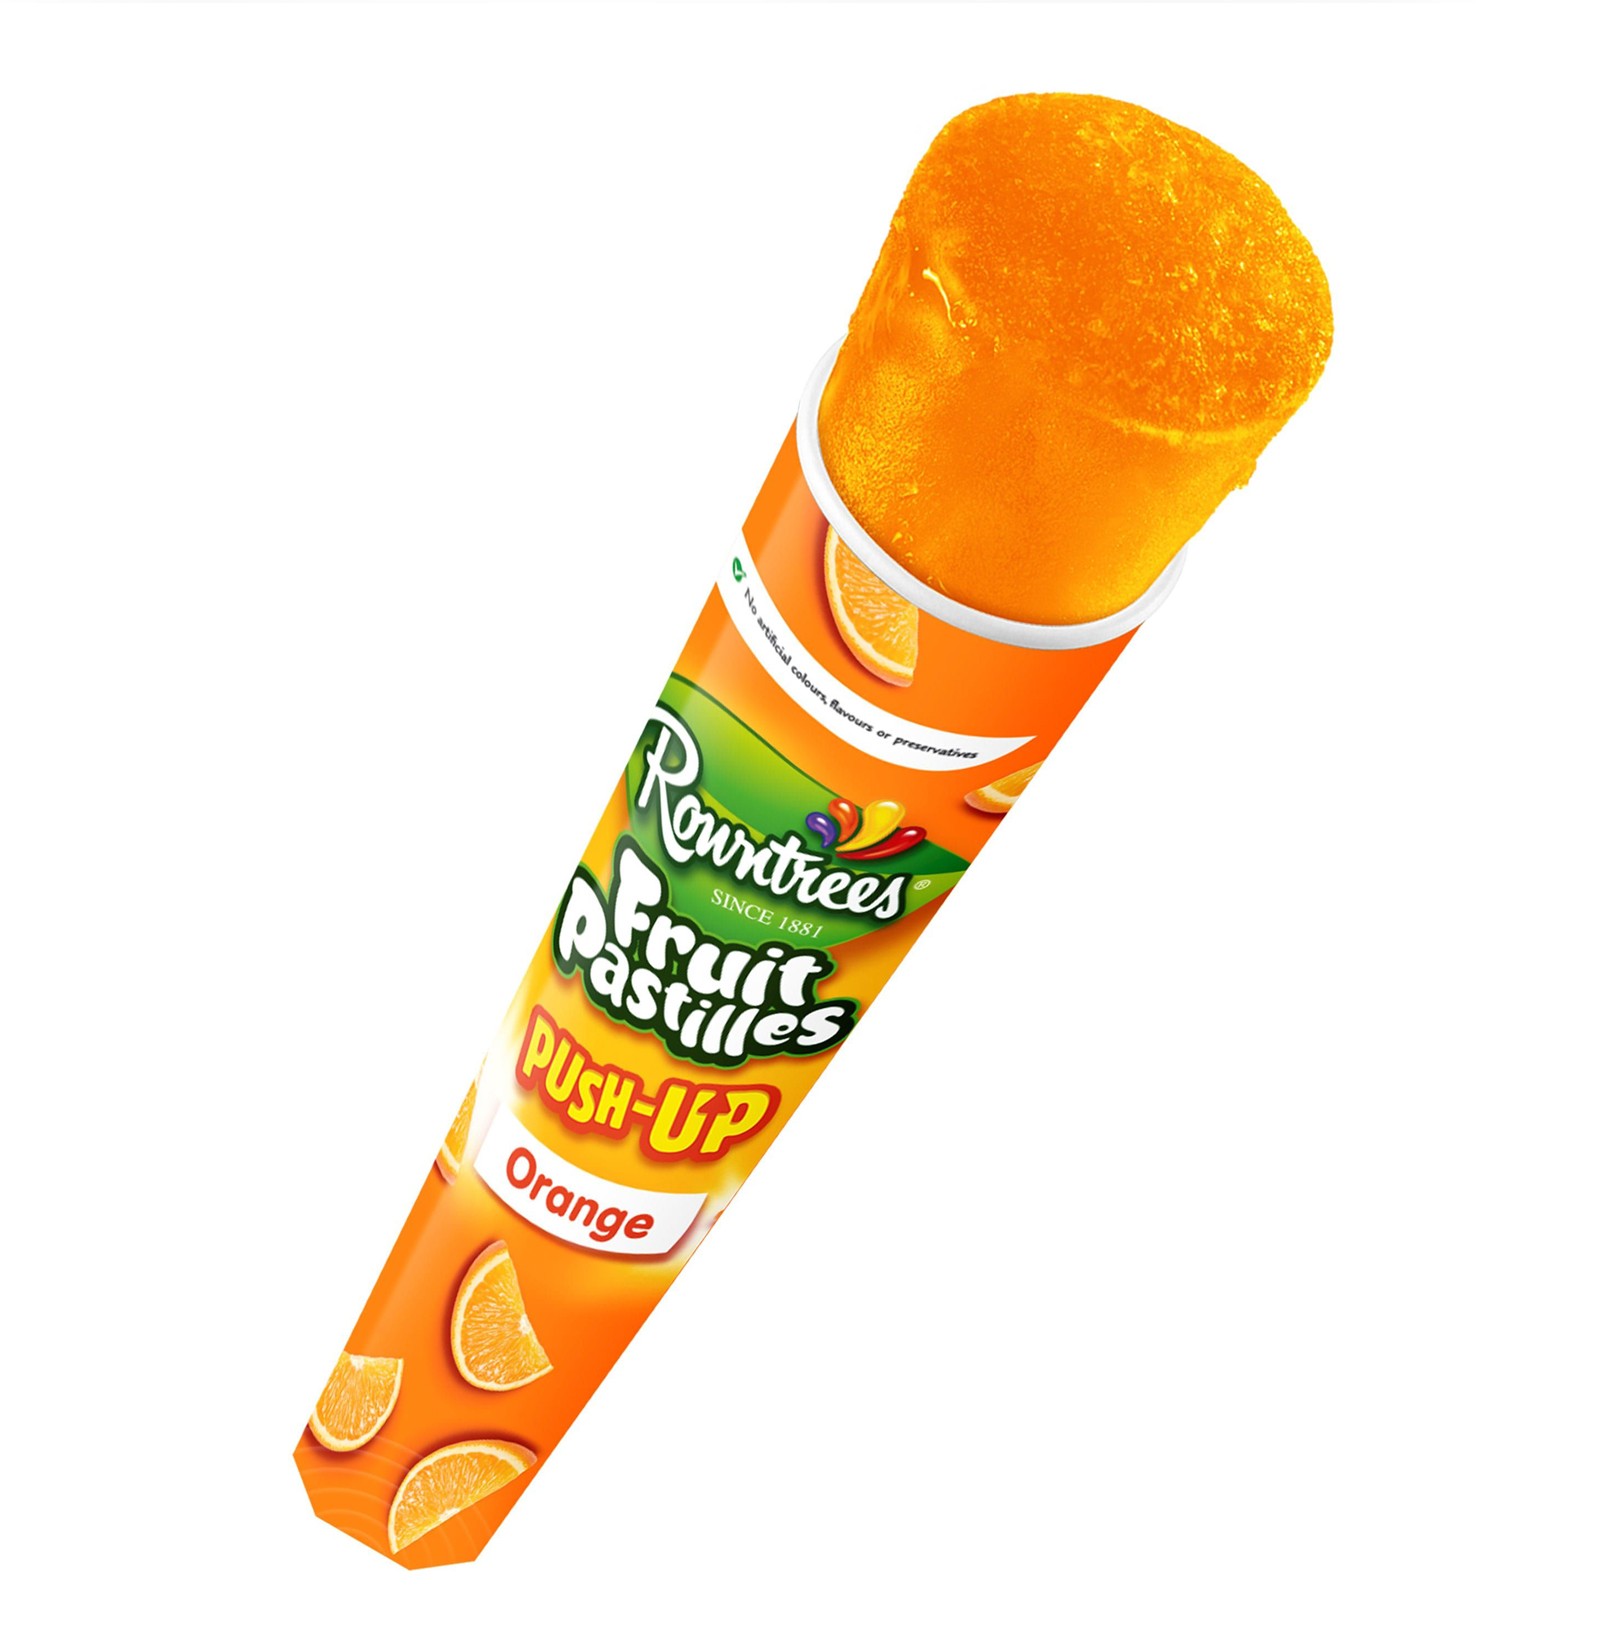 Rowntrees Orange Push Up Ice Lolly